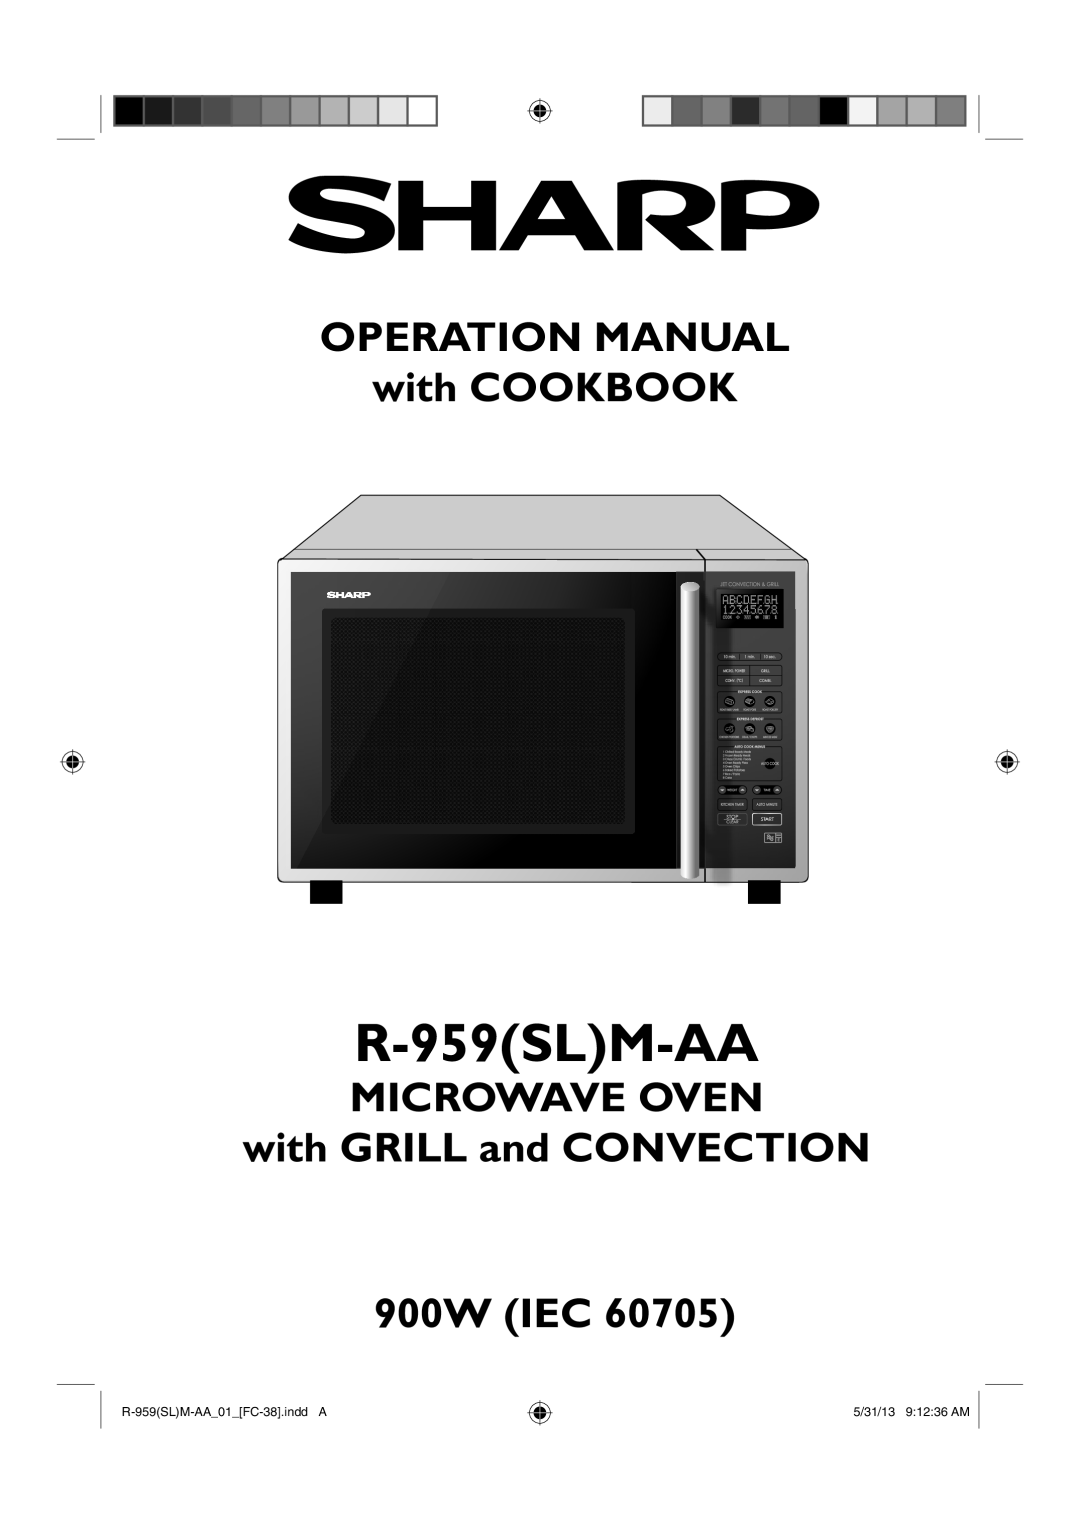 Sharp R-959(SL)M-AA manual R-959SLM-AA, OPERATION MANUAL with COOKBOOK, MICROWAVE OVEN with GRILL and CONVECTION 900W IEC 